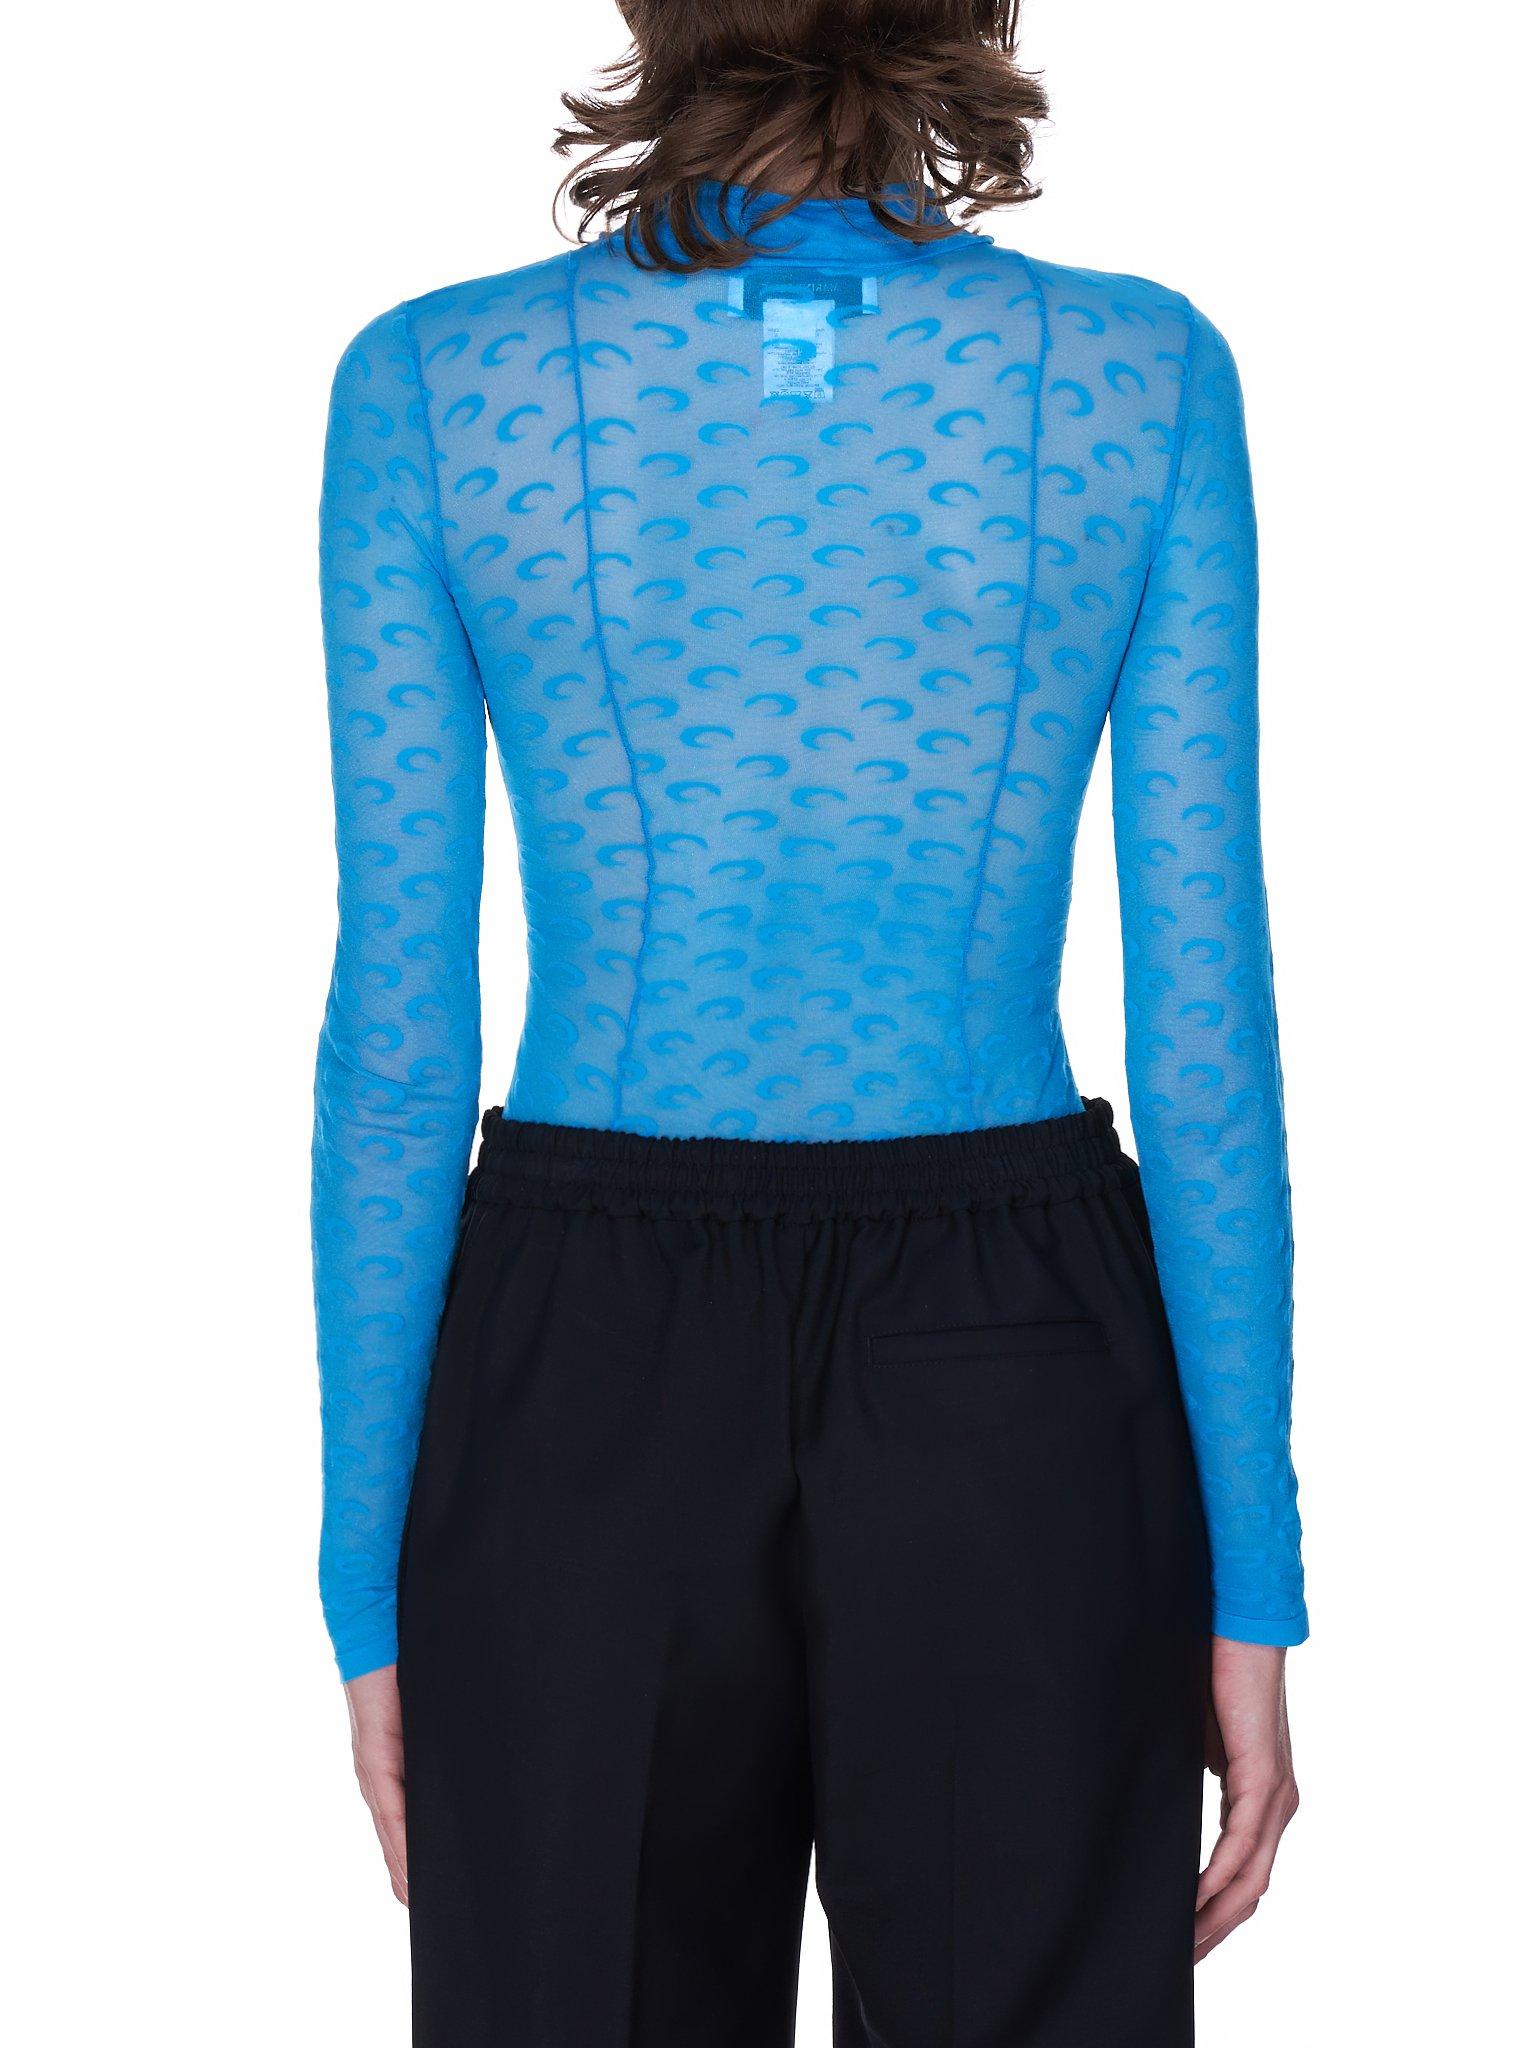 Marine Serre Synthetic Sheer Moon Jacquard Top in Cobalt (Blue) | Lyst